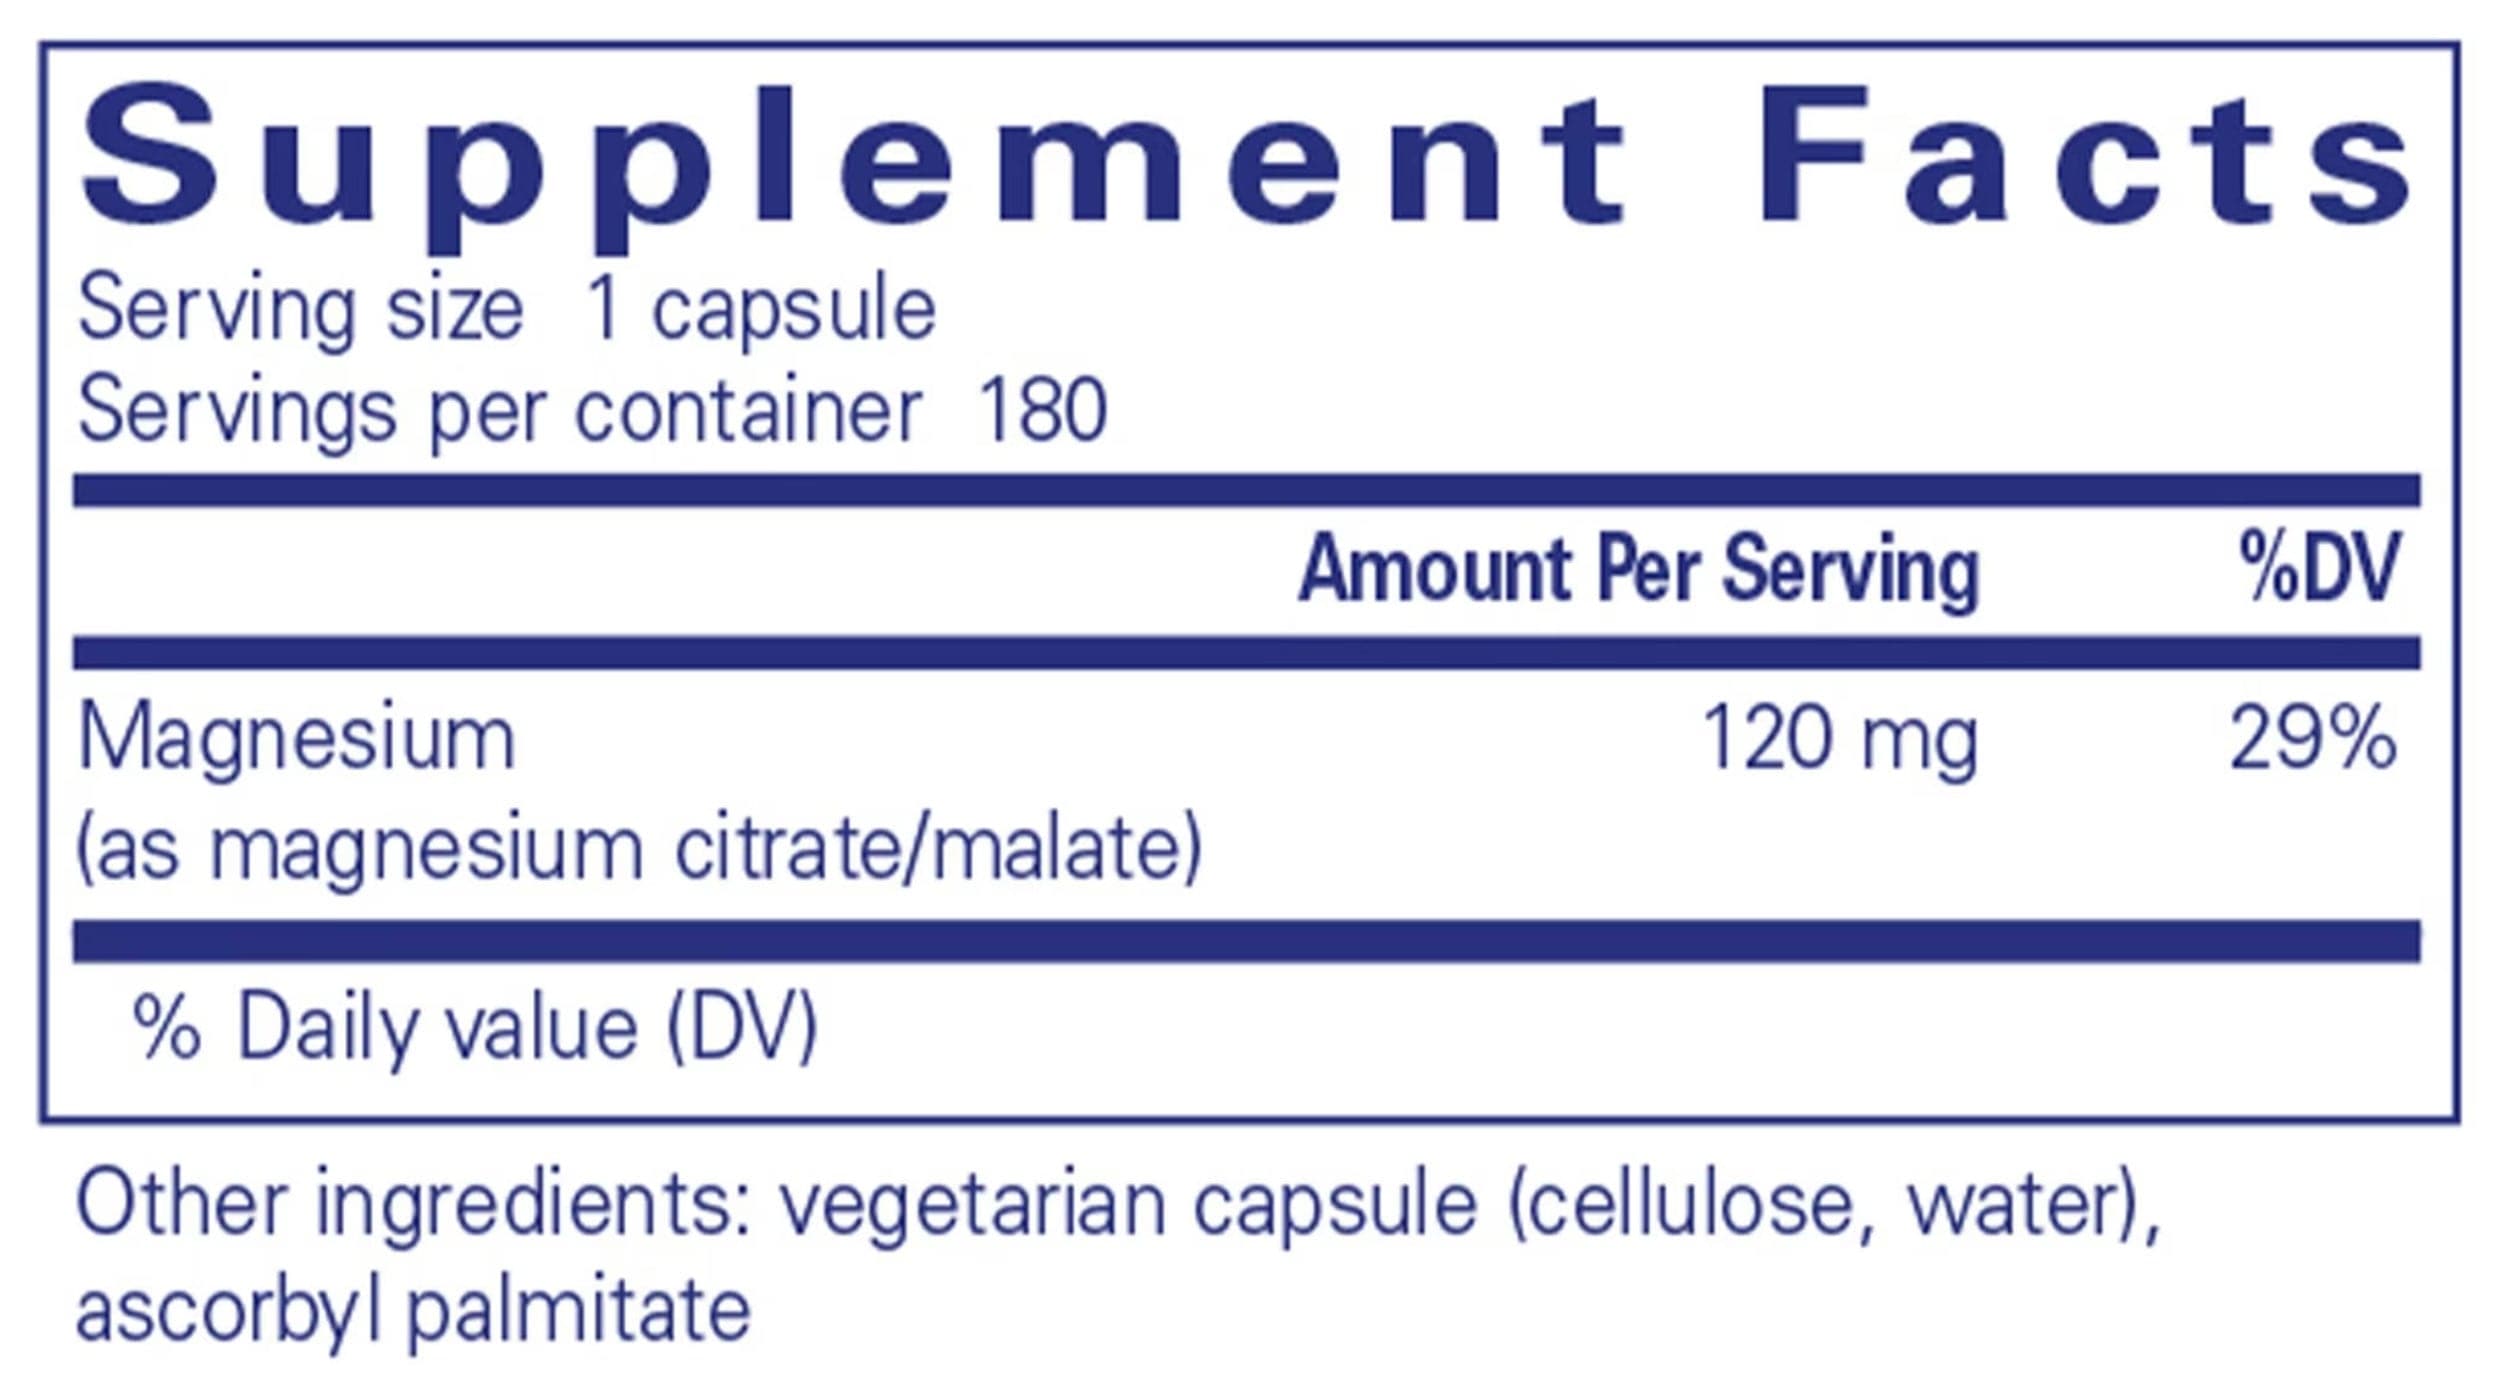 Pure Encapsulations Magnesium (citrate/malate) Ingredients